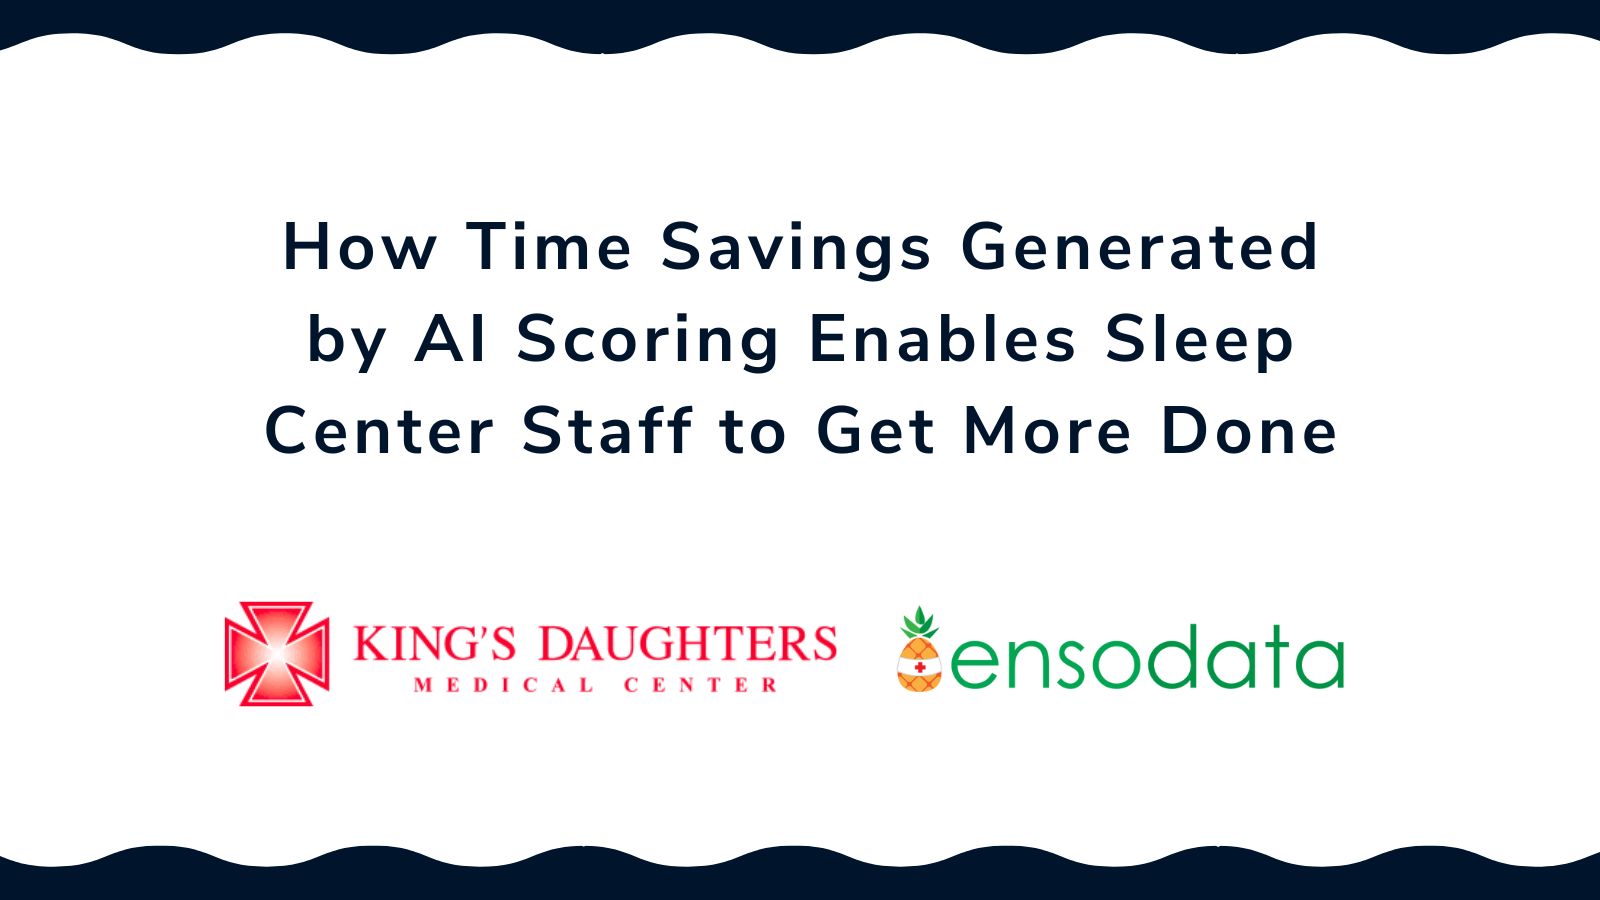 Read the Case Study - How Time Savings Generated by AI Scoring Enables Sleep Center Staff to Get More Done